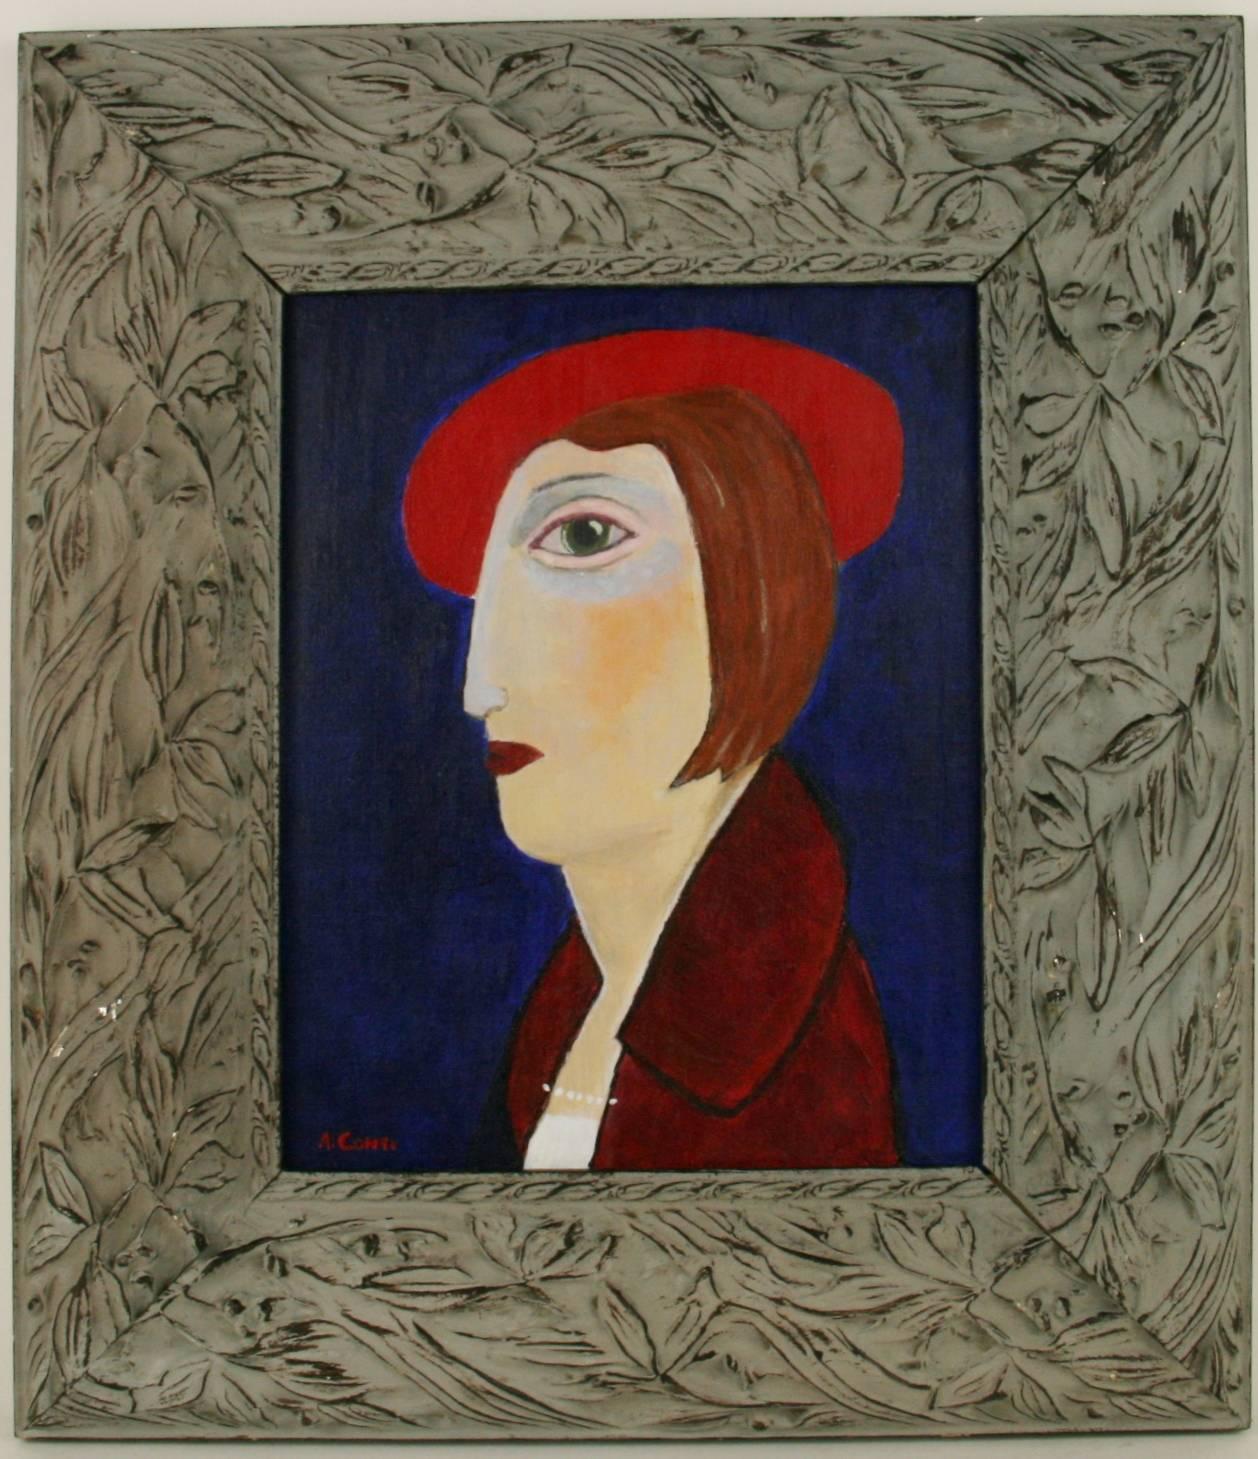 Unknown Figurative Painting - Red Hat Portrait Painting